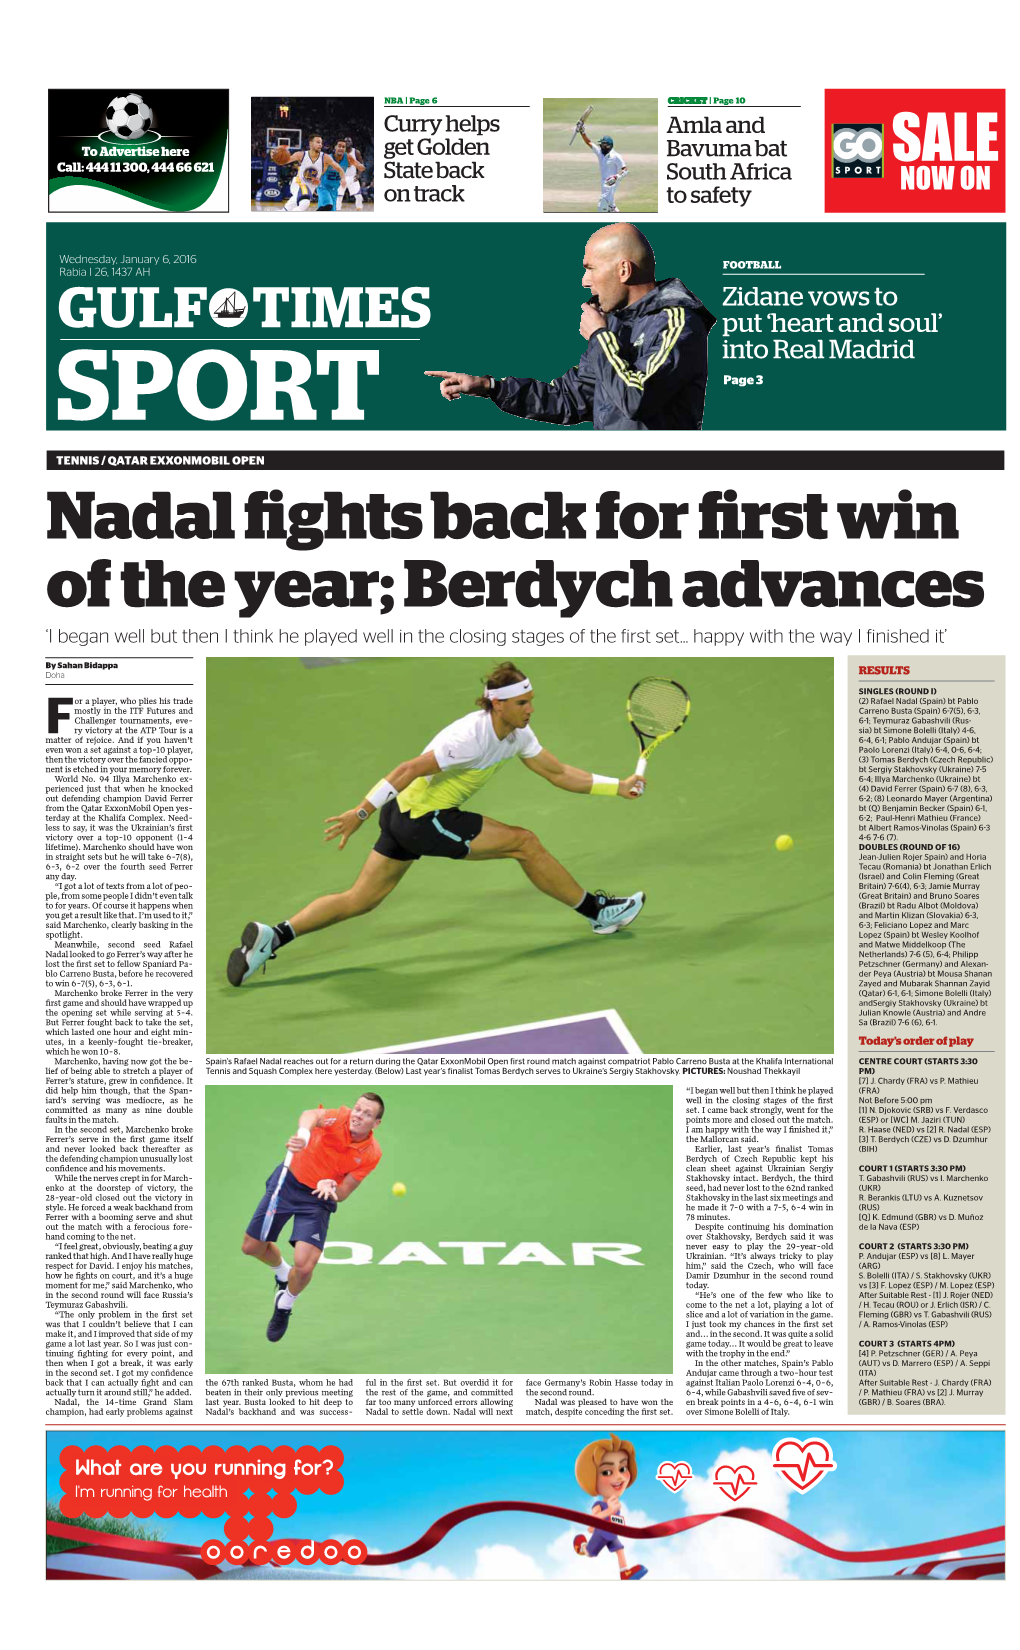 Nadal Fights Back for First Win of the Year